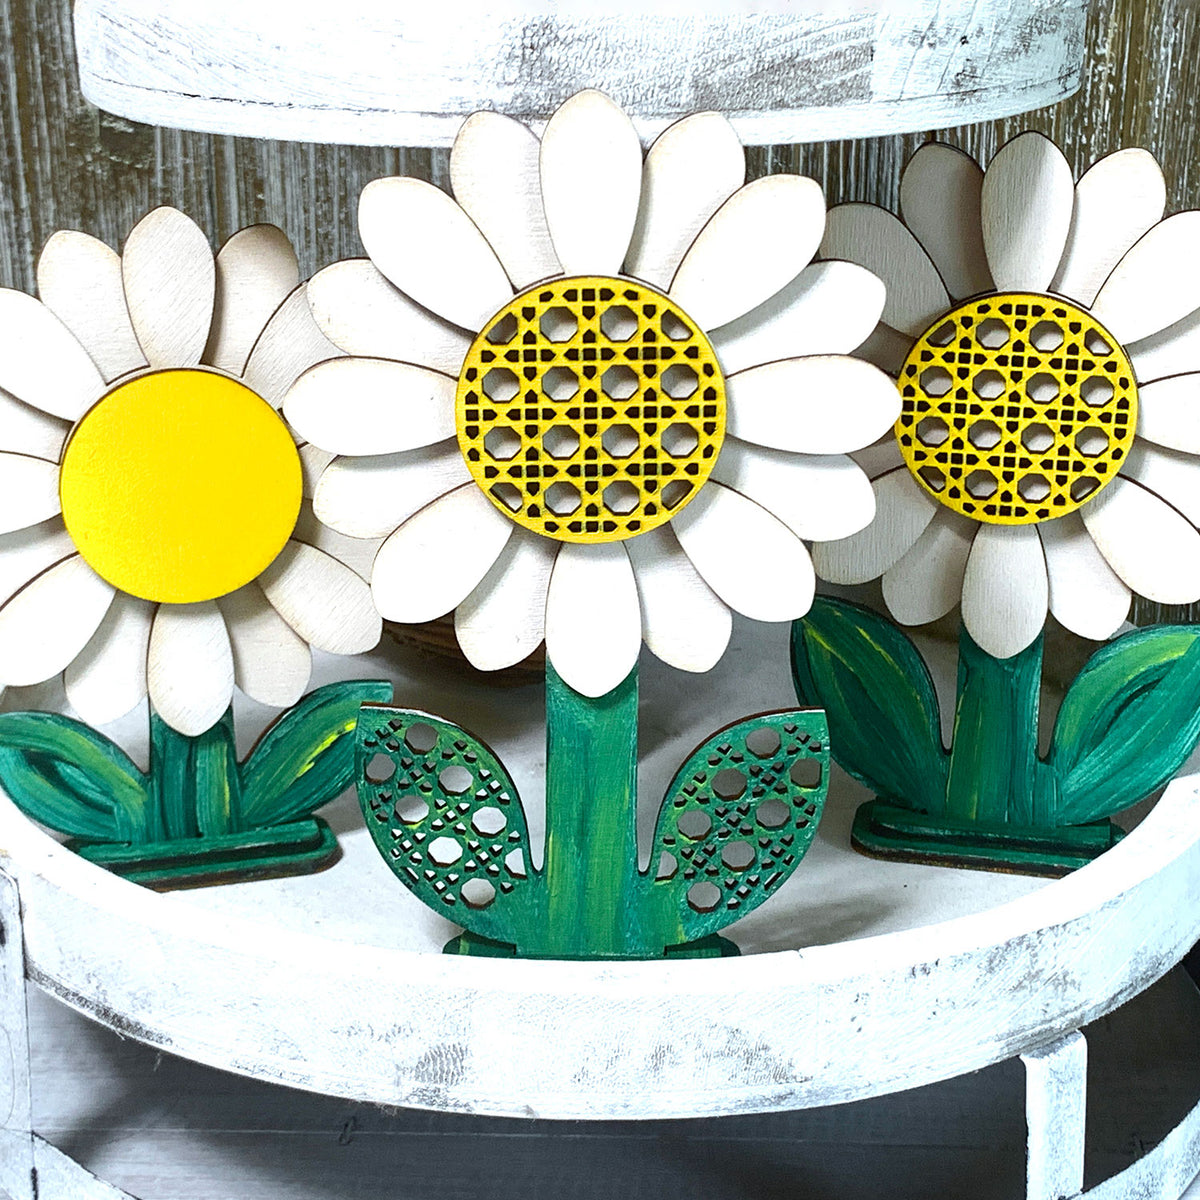 Premium Photo  Front view of daisy decor on a stand